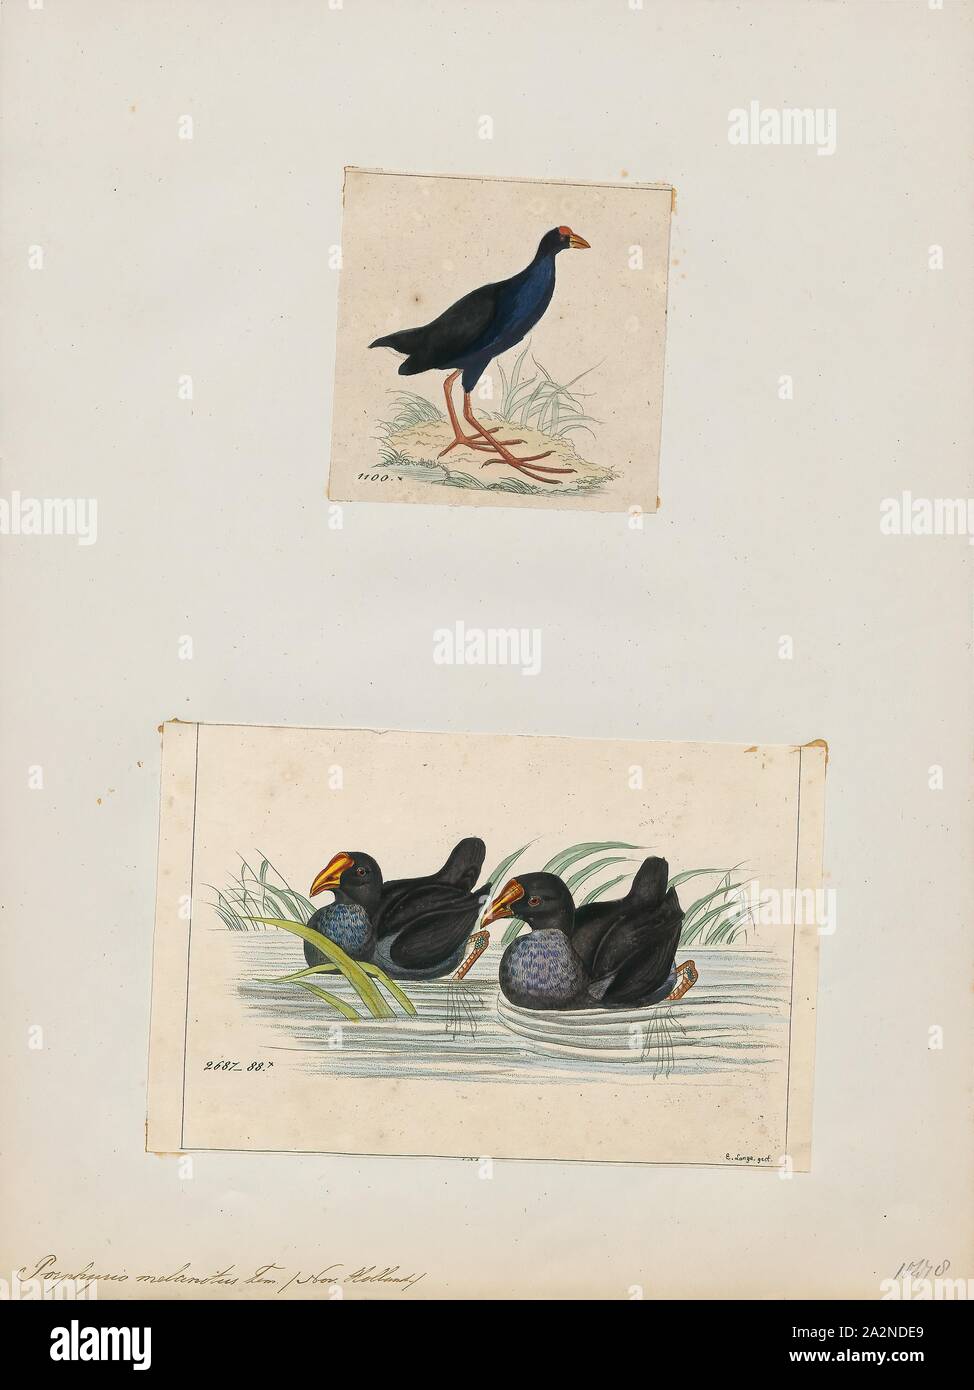 Porphyrio melanotus, Print, The Australasian swamphen (Porphyrio melanotus) is a species of swamphen (Porphyrio) occurring in eastern Indonesia (the Moluccas, Aru and Kai Islands), Papua New Guinea, Australia and New Zealand. In New Zealand, it is known as the pukeko (from the Māori pūkeko). The species used to be considered a subspecies of the purple swamphen., 1700-1880 Stock Photo